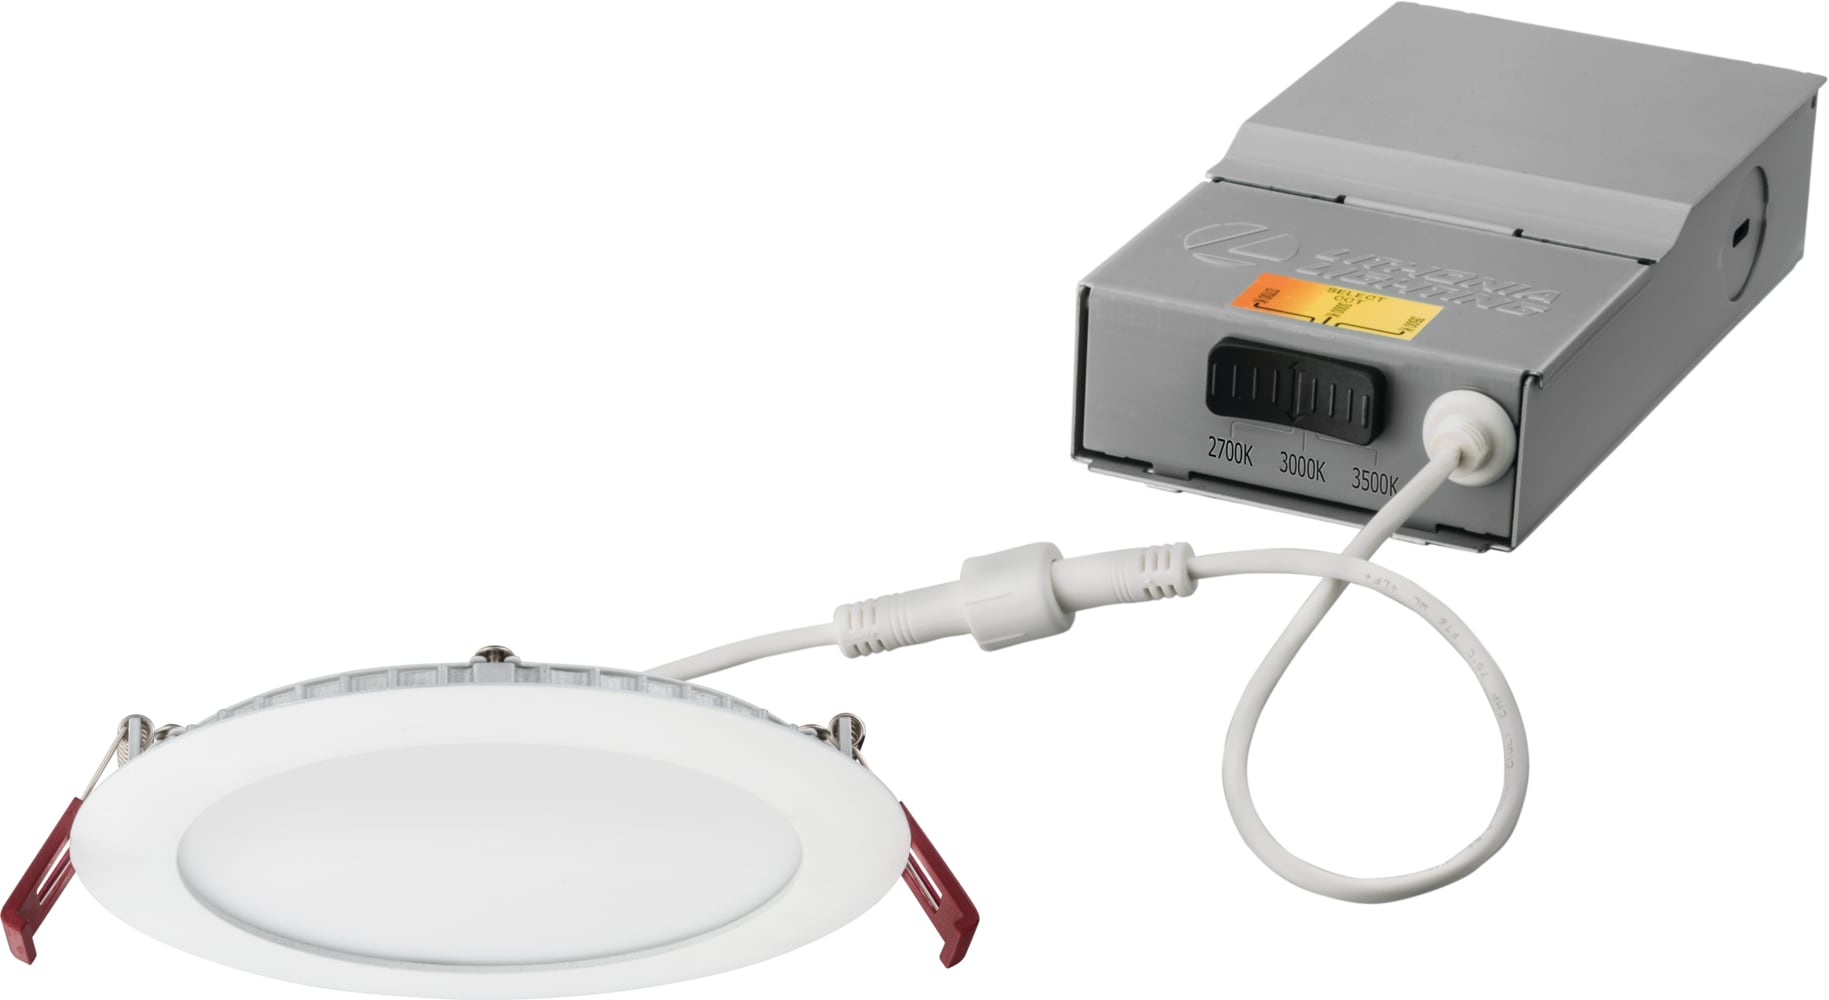 LED Under Cabinet -USB Charger 9 Watt 21" Inch 3000K or 4000K Switchable 